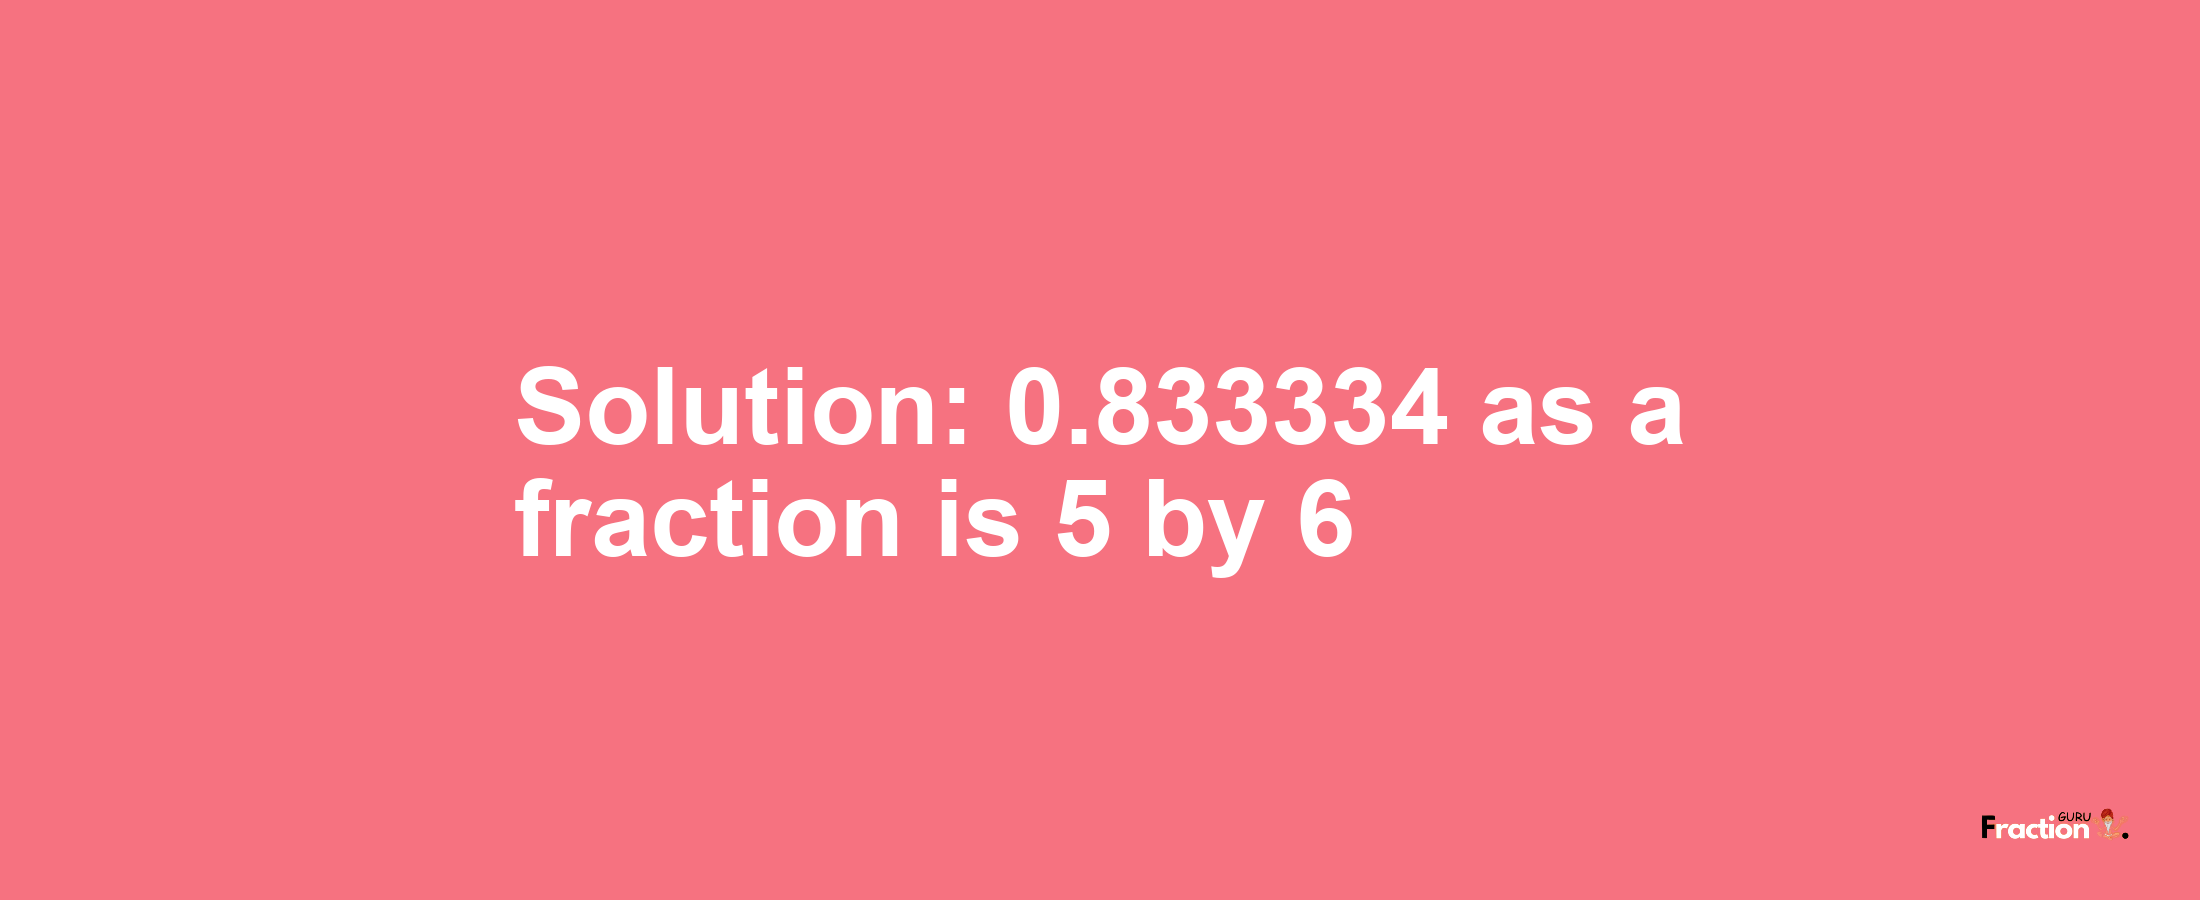 Solution:0.833334 as a fraction is 5/6